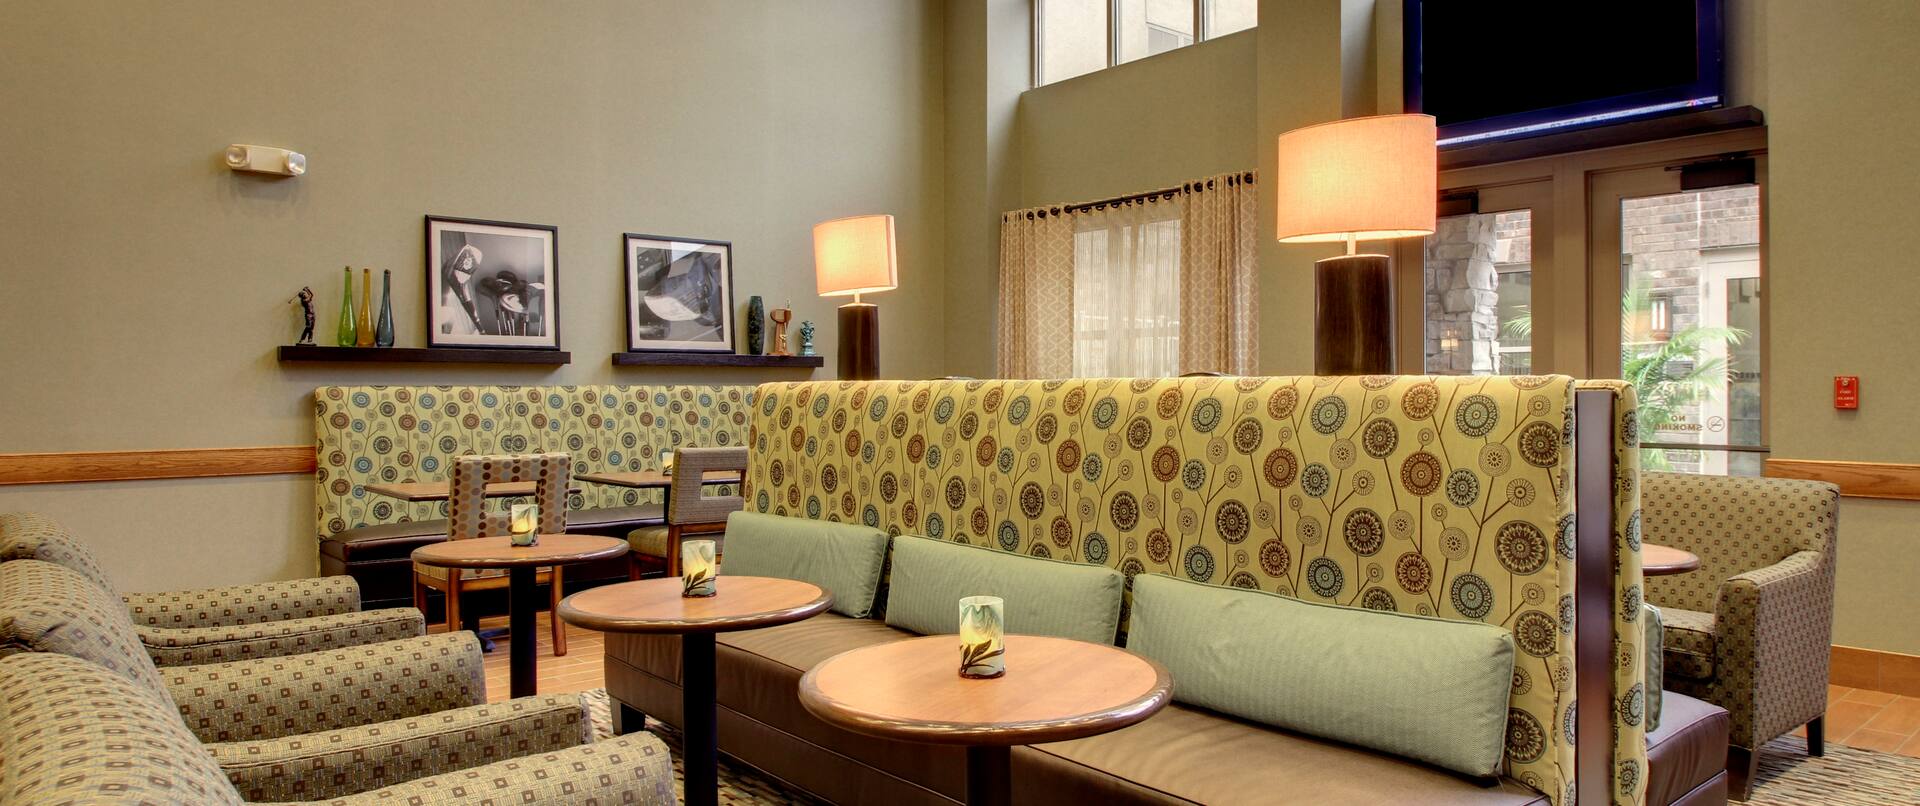 Tables, Chairs, and Booth Seating in Breakfast Lounge Area